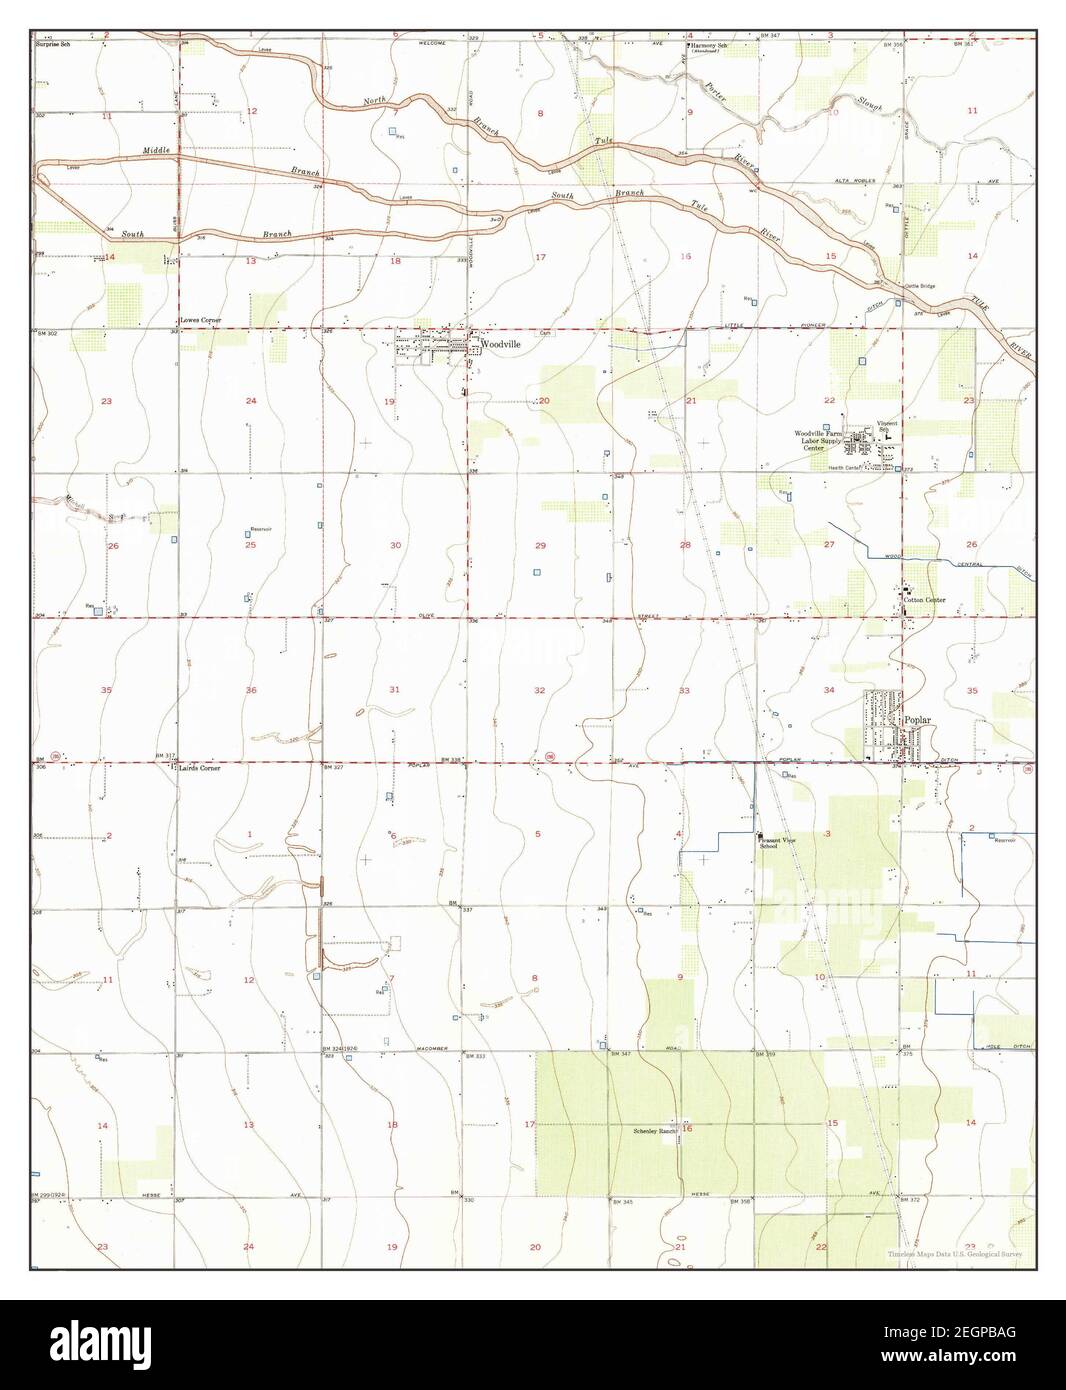 Woodville, California, map 1950, 1:24000, United States of America by Timeless Maps, data U.S. Geological Survey Stock Photo